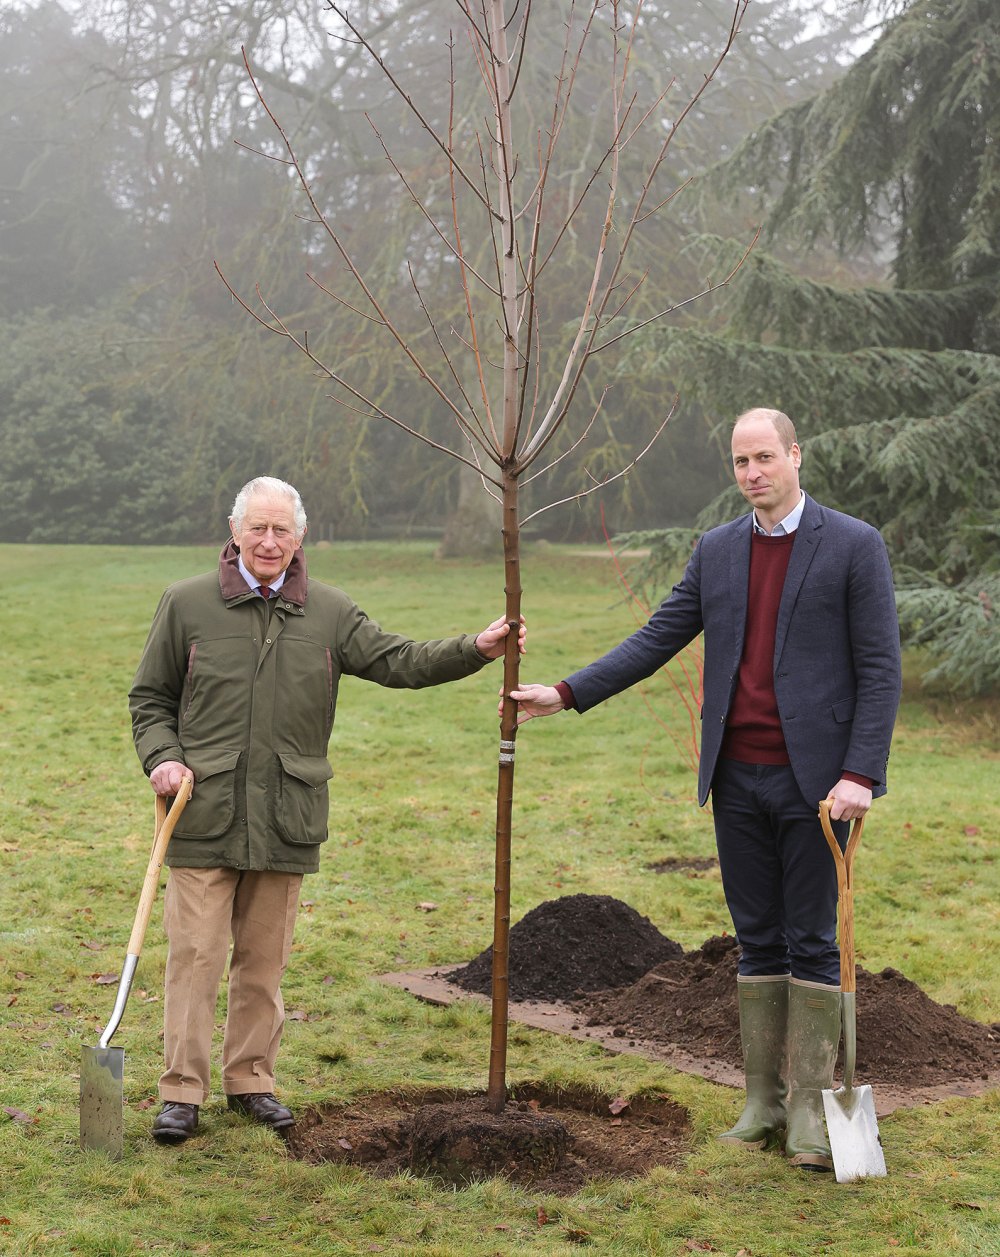 King Charles III Announces the End of Late Mother Queen Elizabeth II’s Green Canopy Project- ‘A Fitting Tribute’ - 550